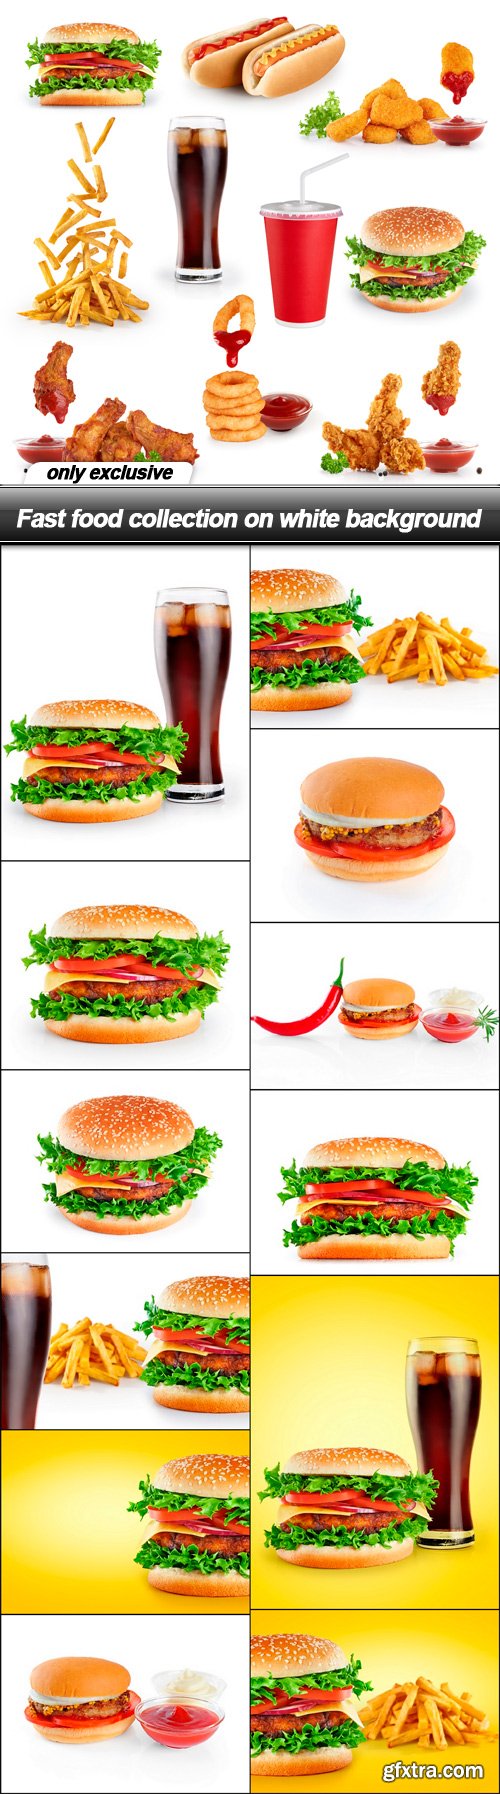 Fast food collection on white background - 13 UHQ JPEG